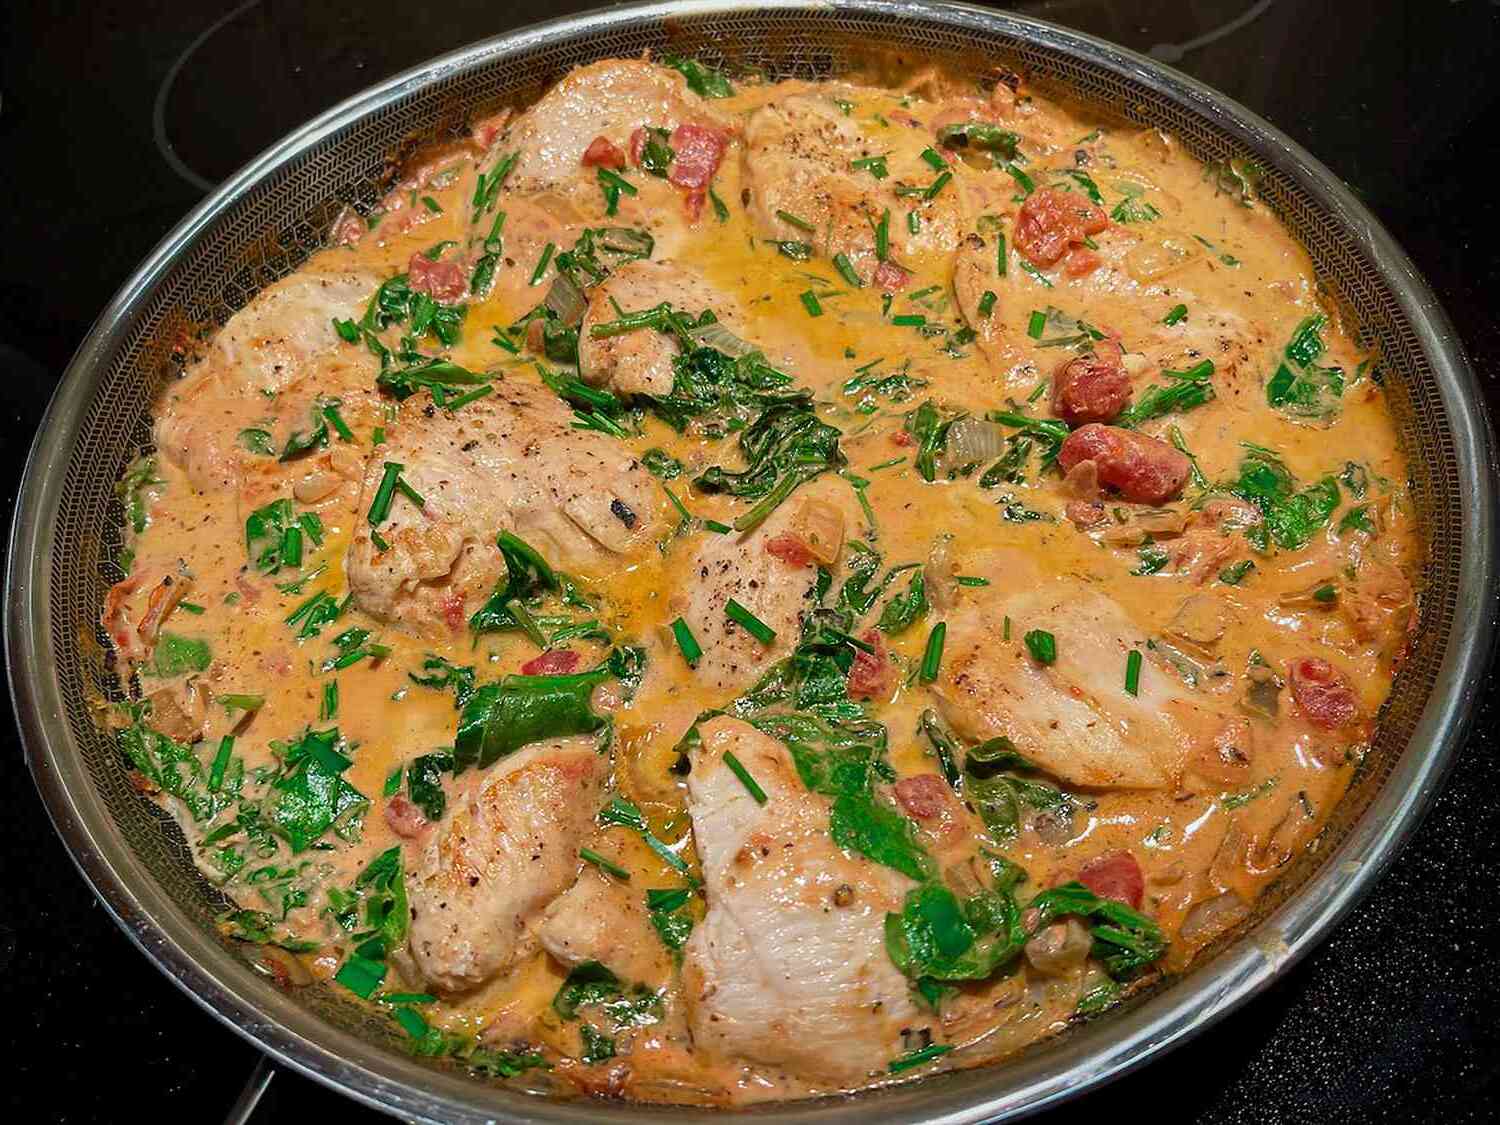 Tantalizing Instant Pot Tuscan Chicken with Spinach and Pine Nuts Recipe